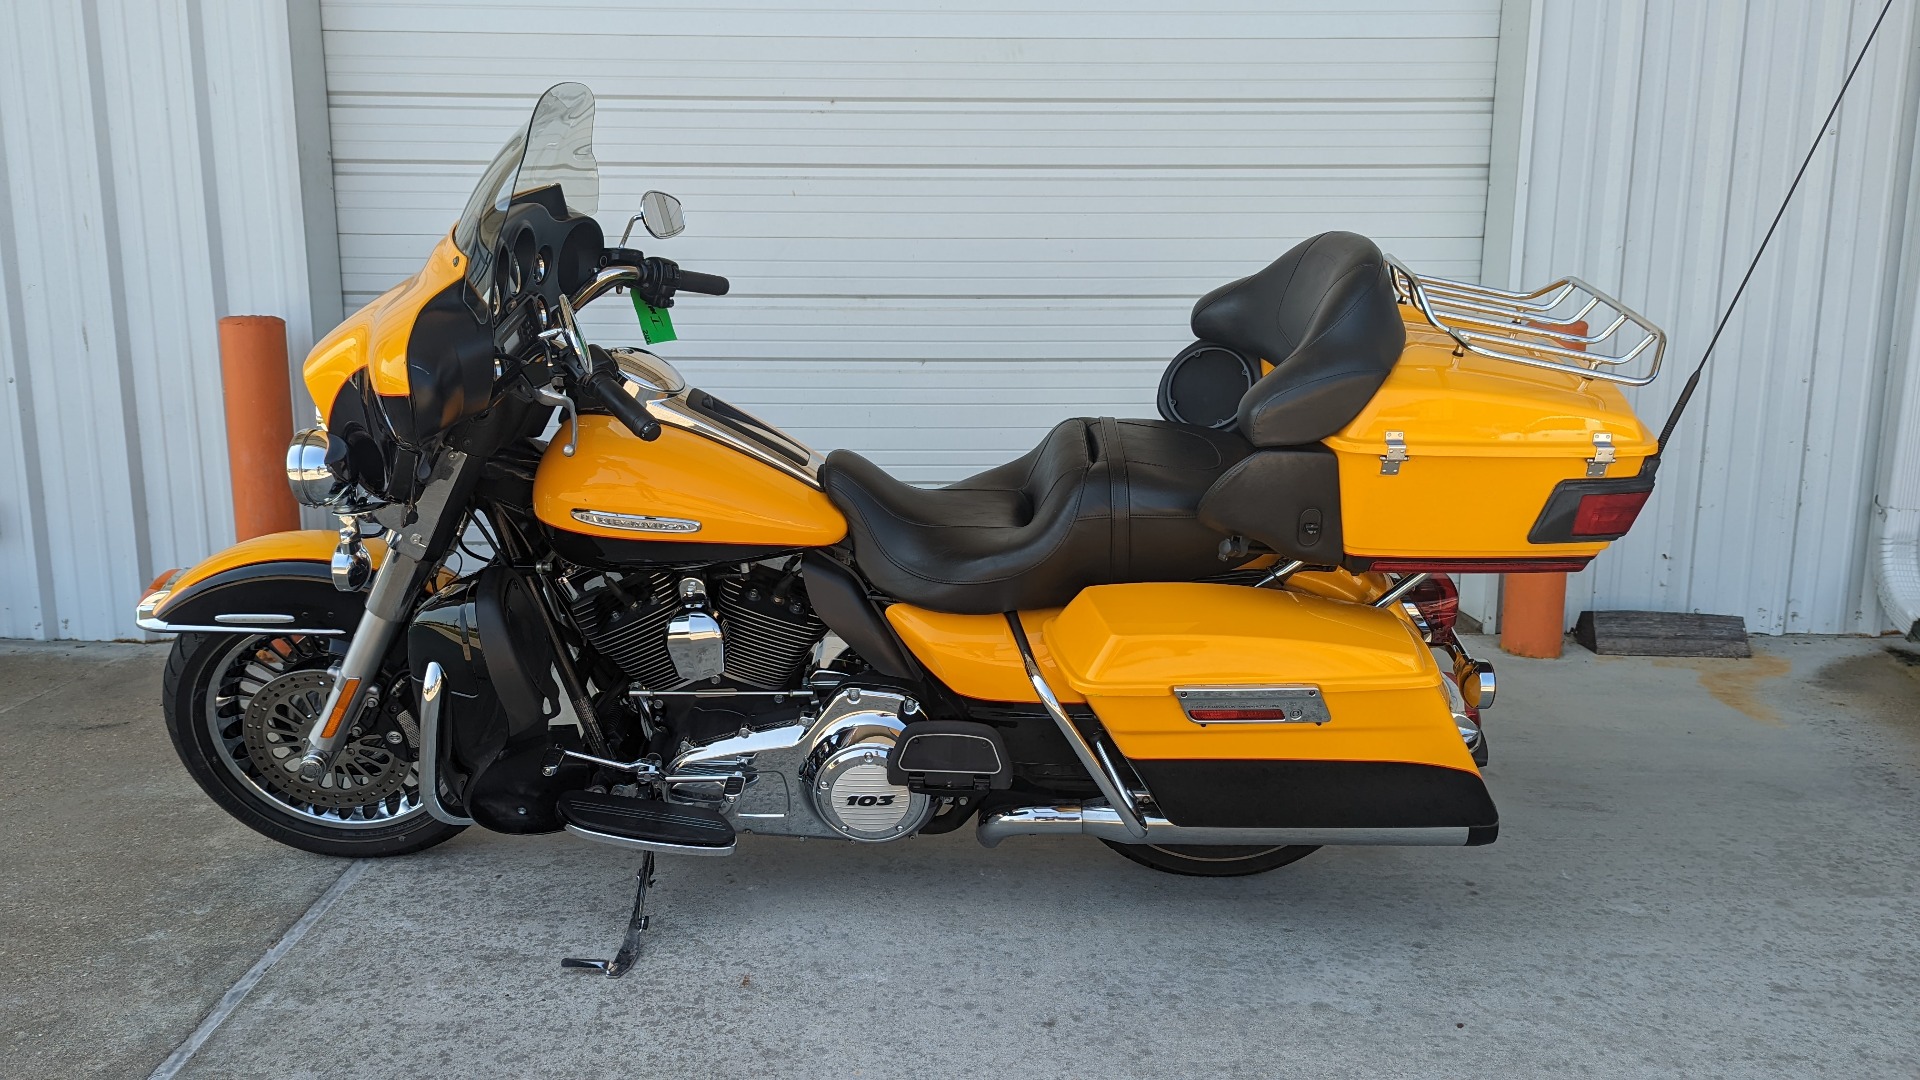 2013 harley electra glide limited for sale - Photo 2